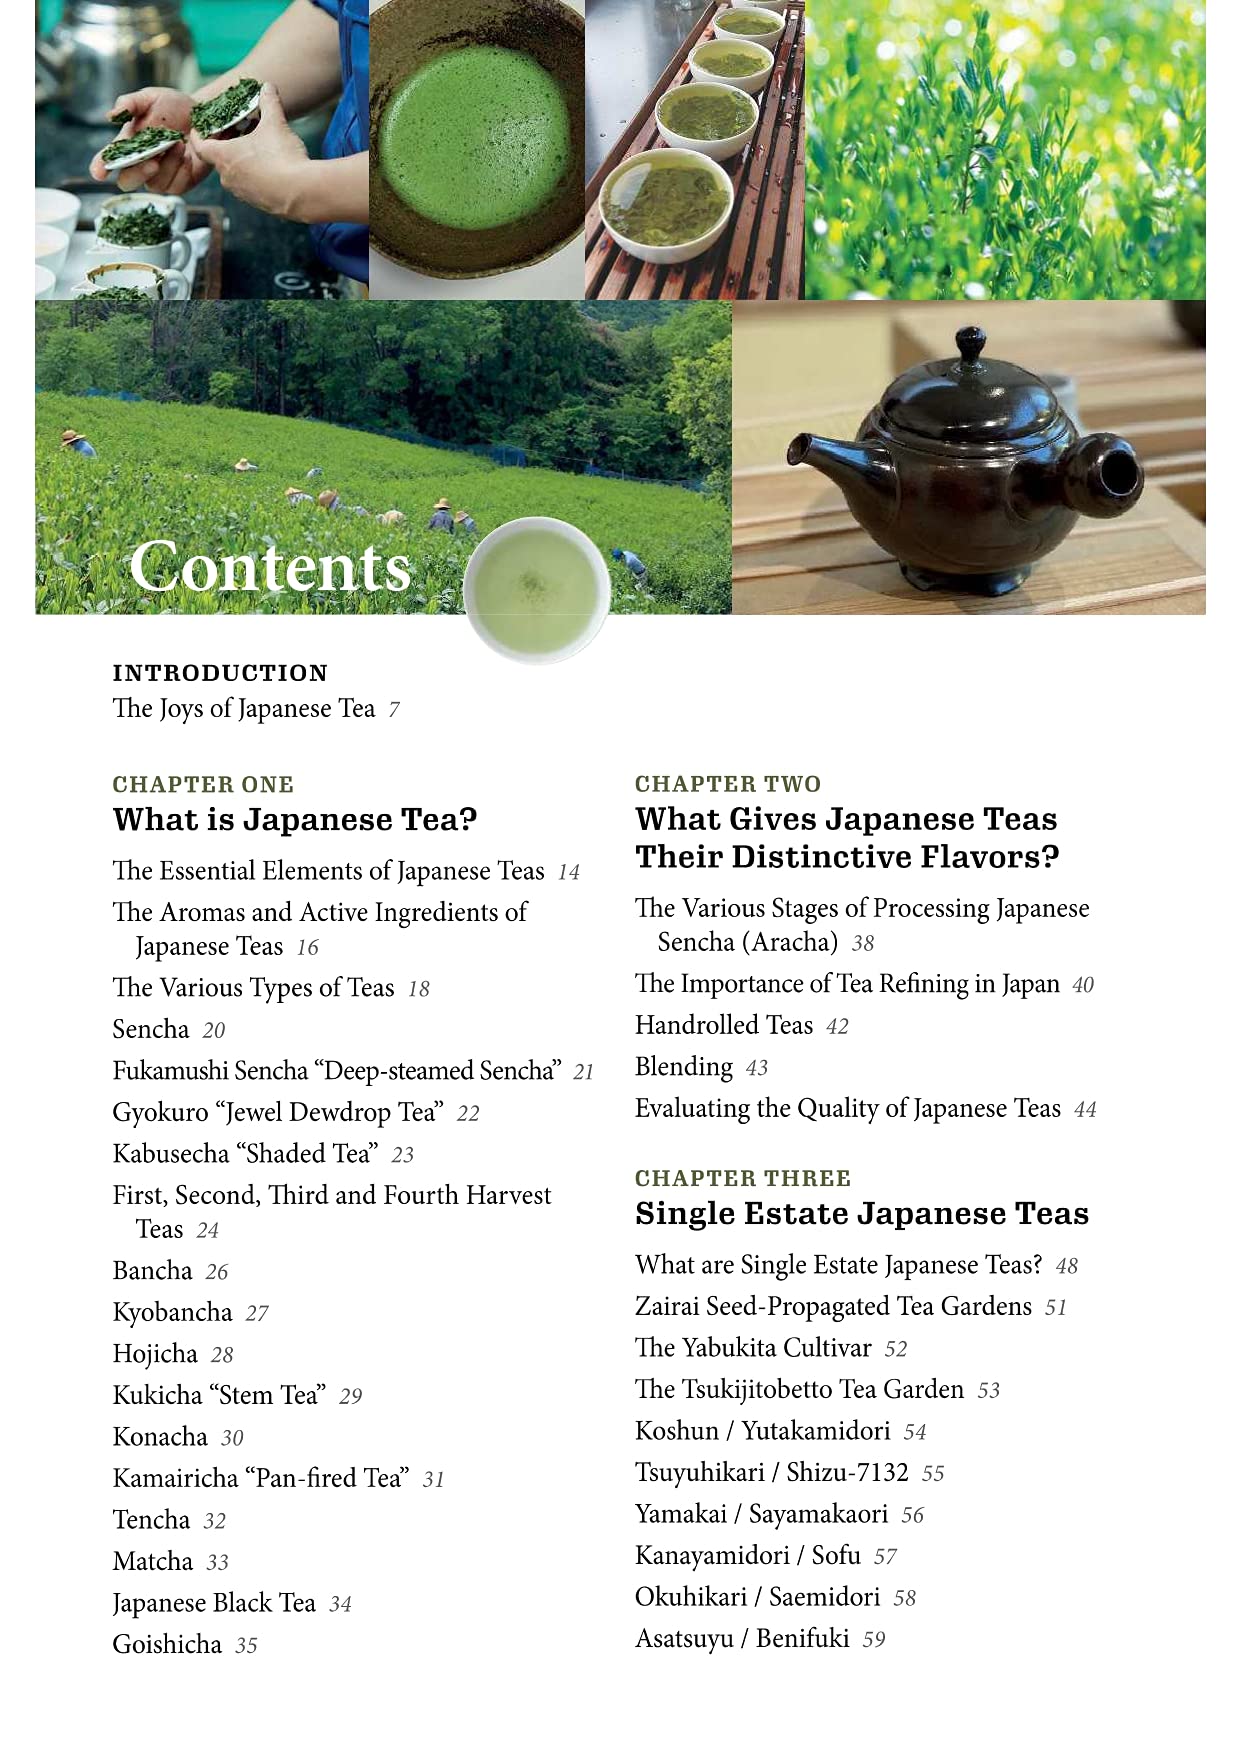 A Beginner's Guide to Japanese Tea by Per Oscar Brekell